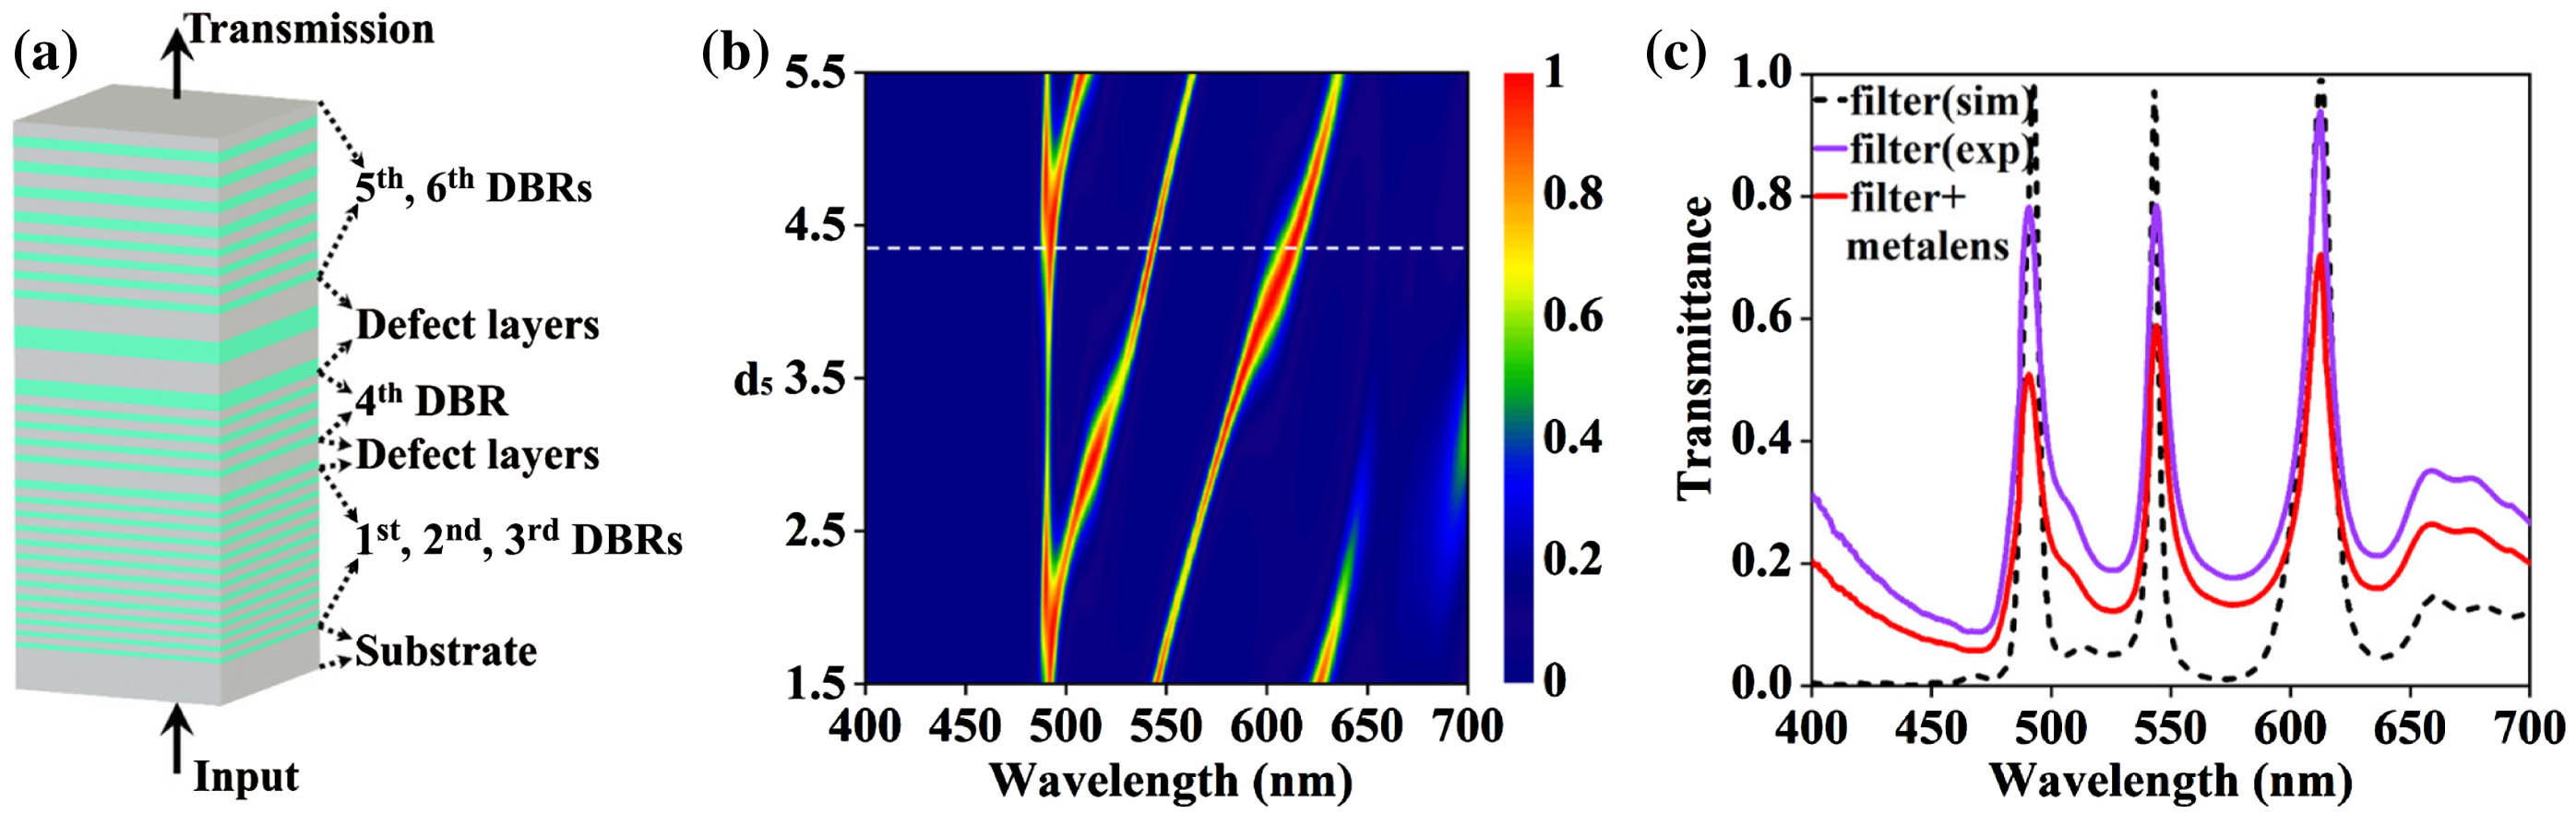 (a) Schematic illustration of the proposed bandpass filter, which is composed of multiple DBRs and several dielectric defect layers sandwiched between them. (b) Simulated transmission spectrum of the designed filter varied with the parameter d5. d5 denotes the varied coefficient of the thickness of the defect layer we selected. The white dashed line indicates the selected value of 4.33 for d5. (c) Simulated transmission spectrum of the filter with the configuration selected in (b) is plotted in black dashed line. The corresponding experimental results of the filter and the complete sample (filter-integrated multiwavelength achromatic metalens) are shown with the purple and red solid lines, respectively.